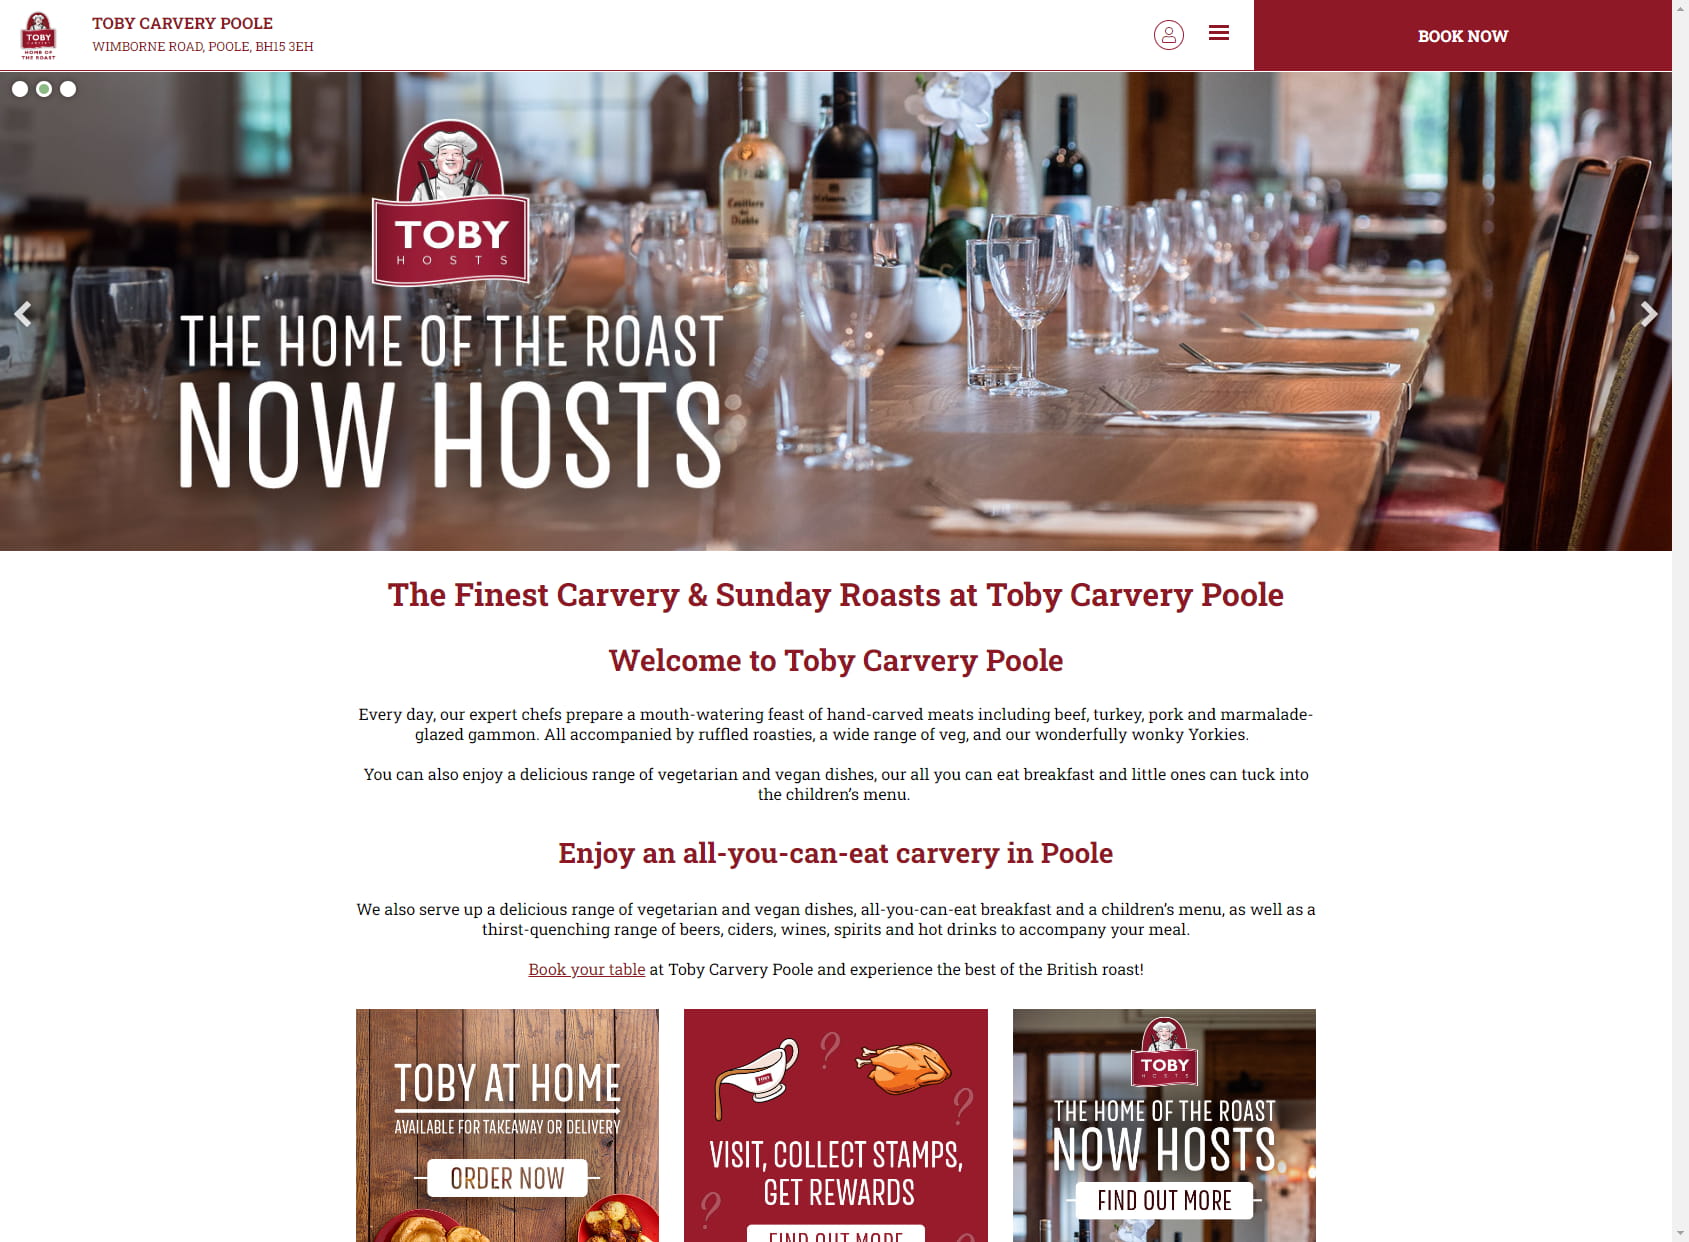 Toby Carvery Poole